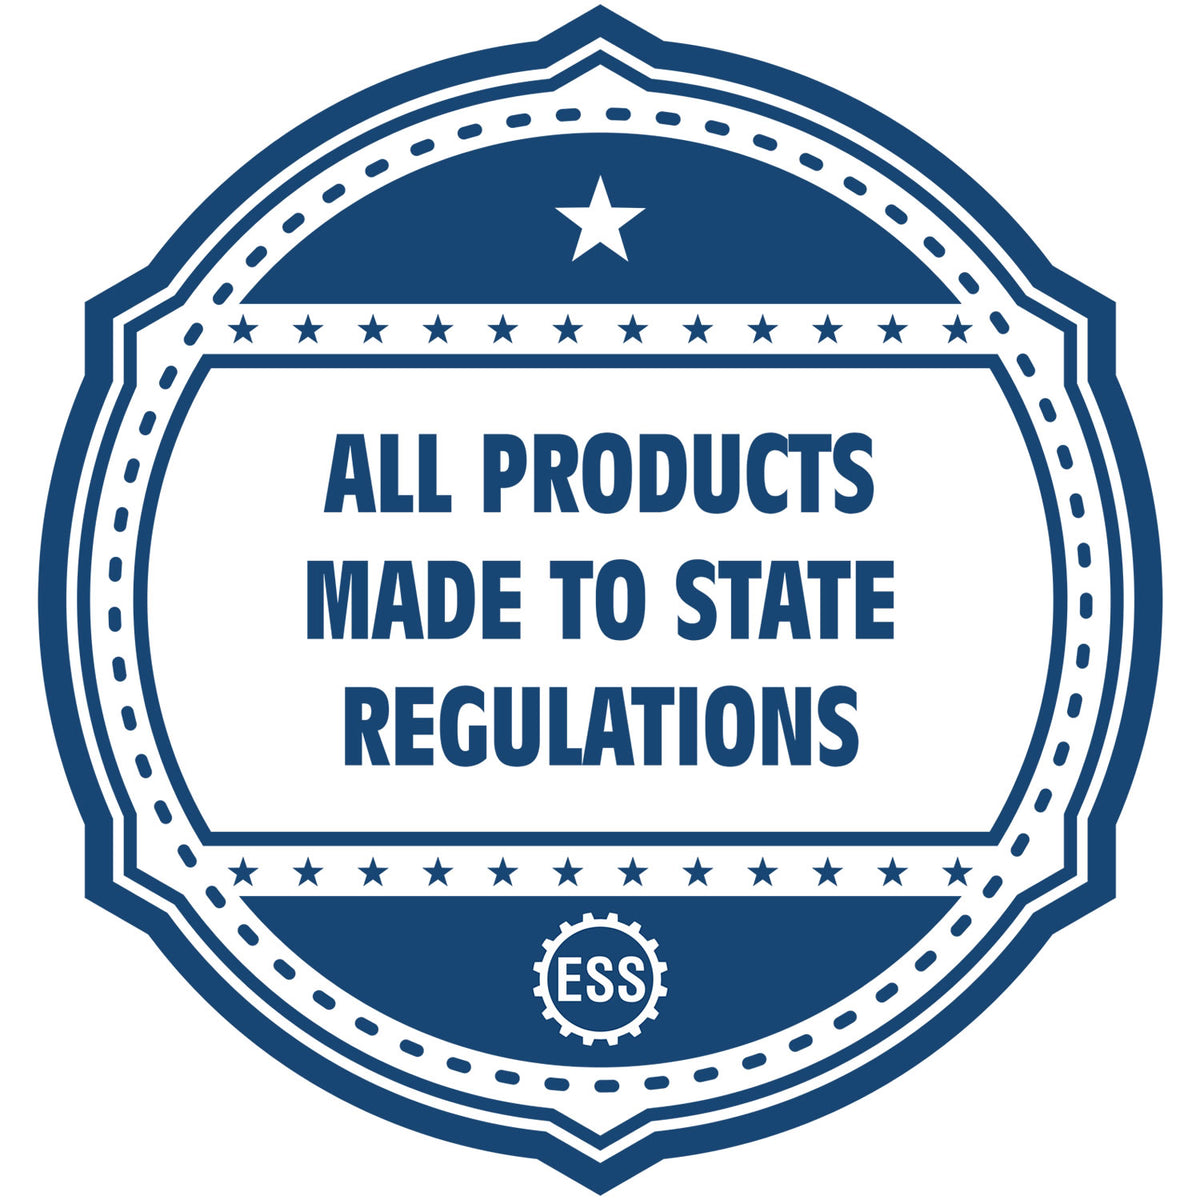 An icon or badge element for the Slim Pre-Inked New Jersey Landscape Architect Seal Stamp showing that this product is made in compliance with state regulations.